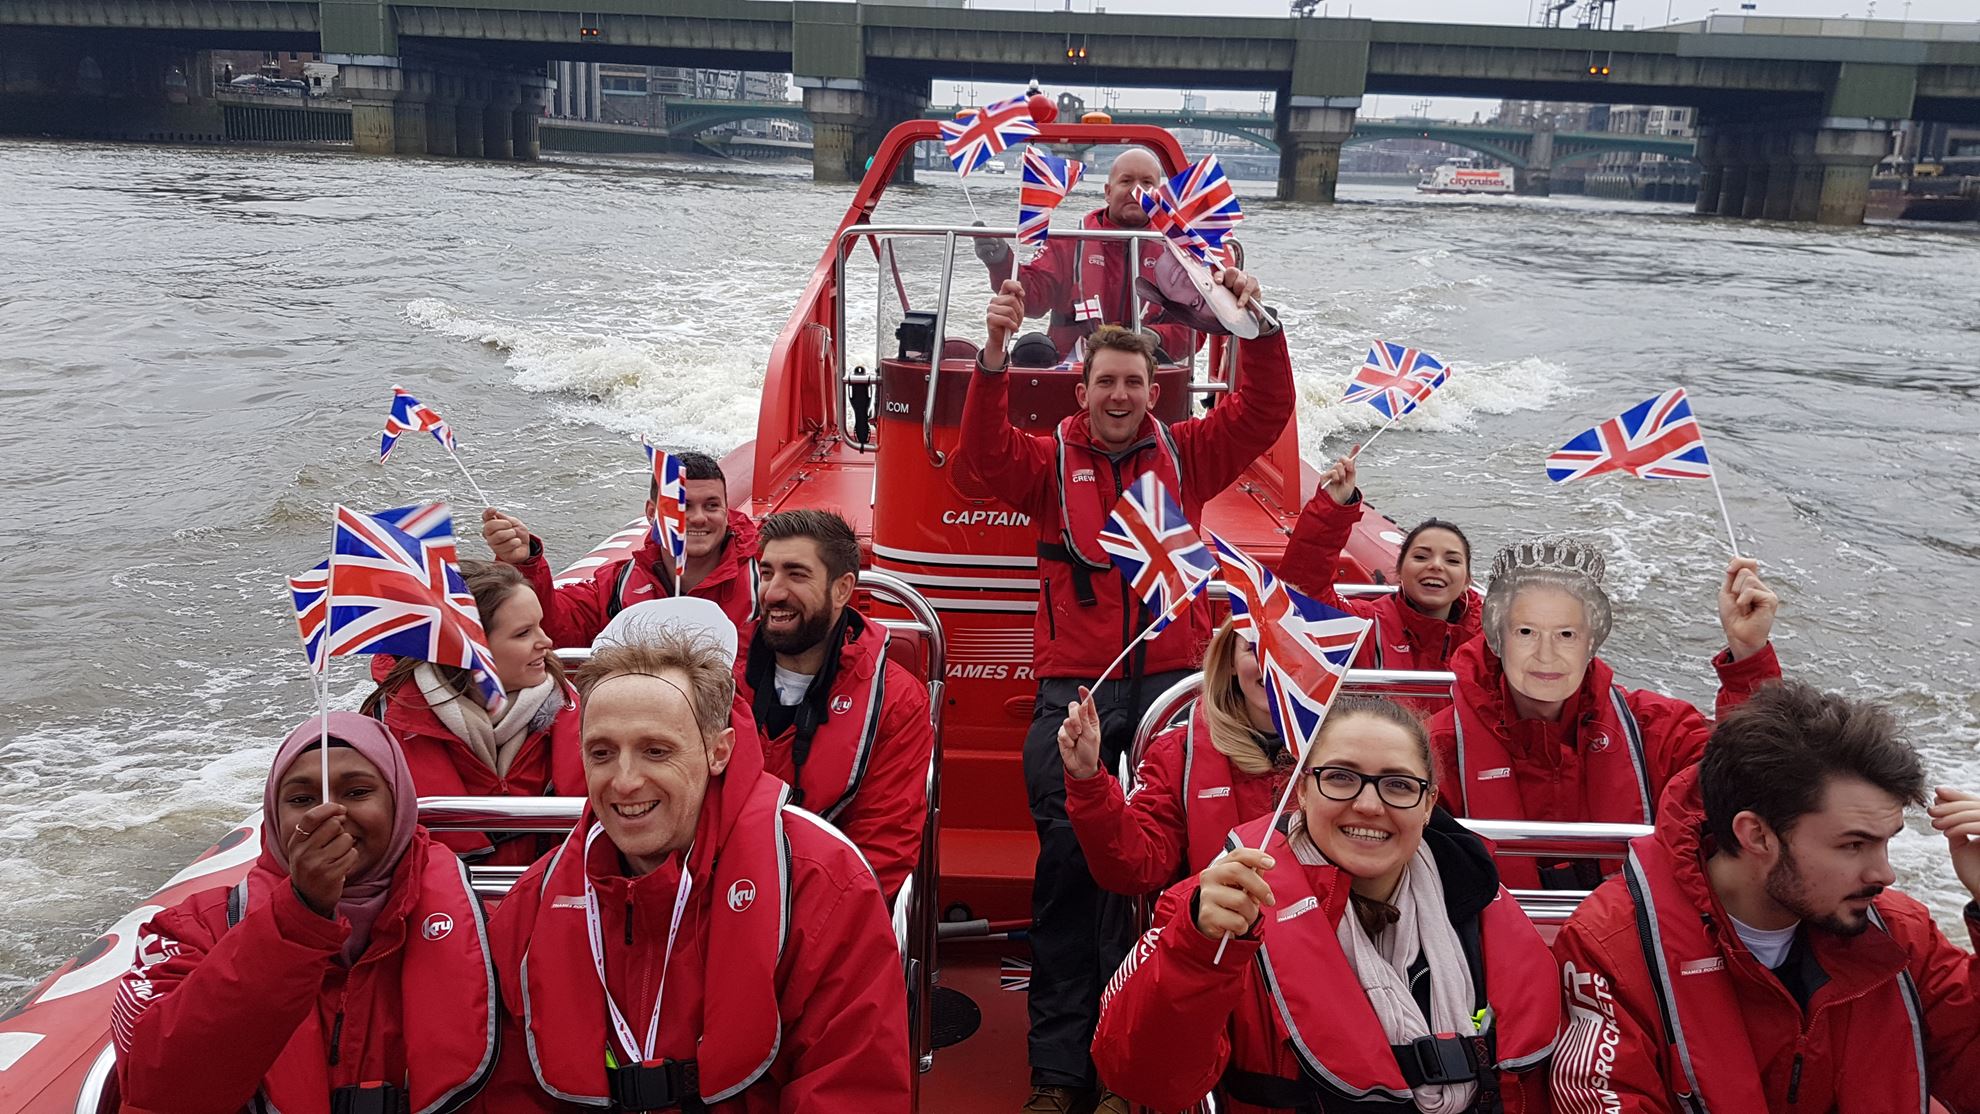 A River Pageant with the Queen? All in a Day's Work!